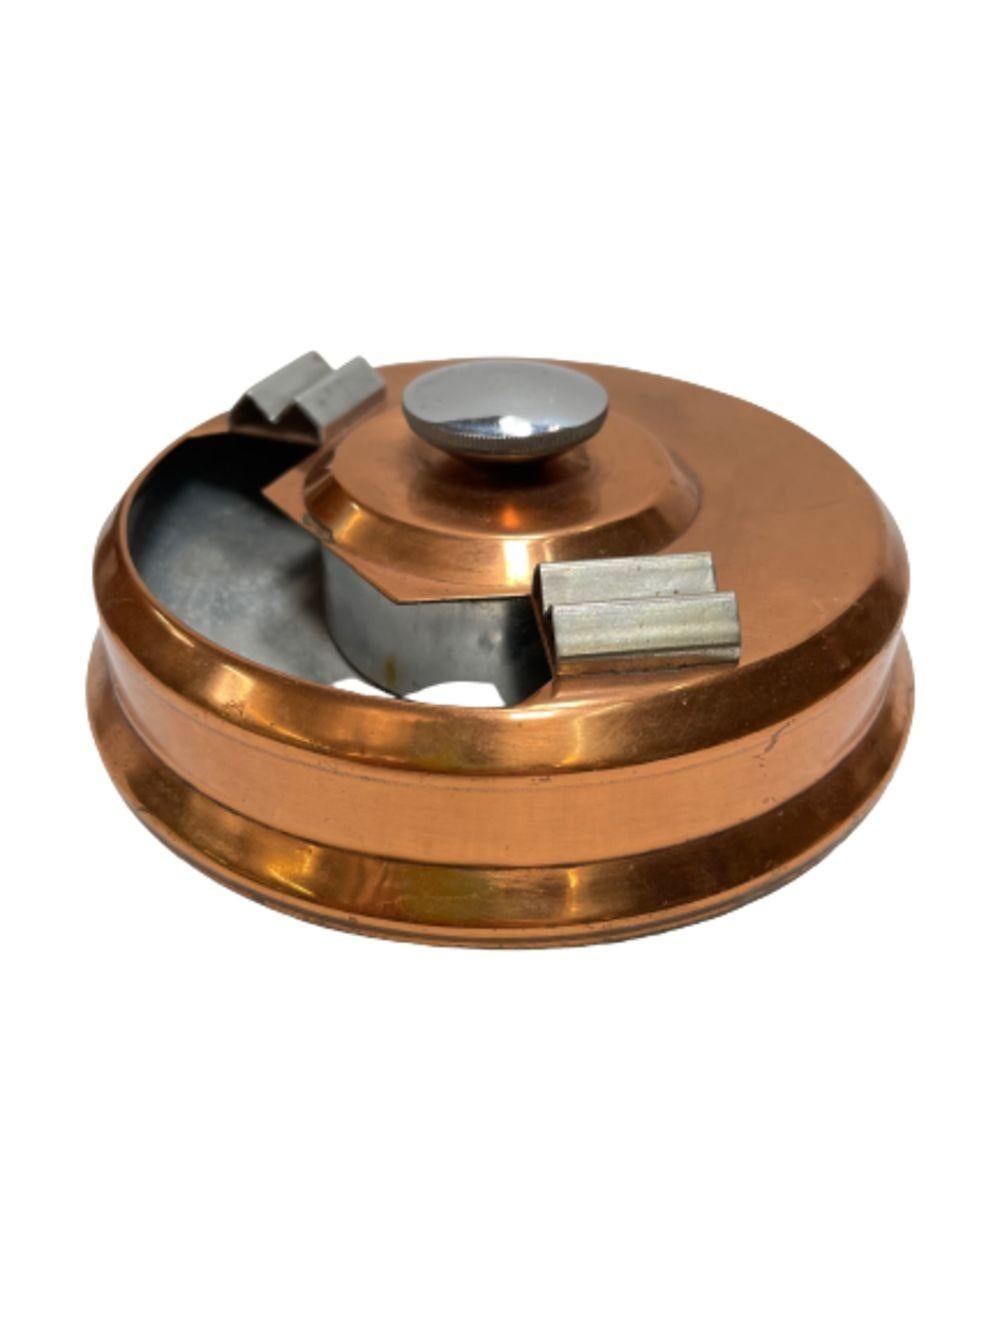 Machine Age Copper and Steel Smokeless Ashtray featuring streamline styling with geometric accents. The ashtray features a solid copper construction with a polish steel interior with 2 steel cigarette holders on each side of the opening. The center